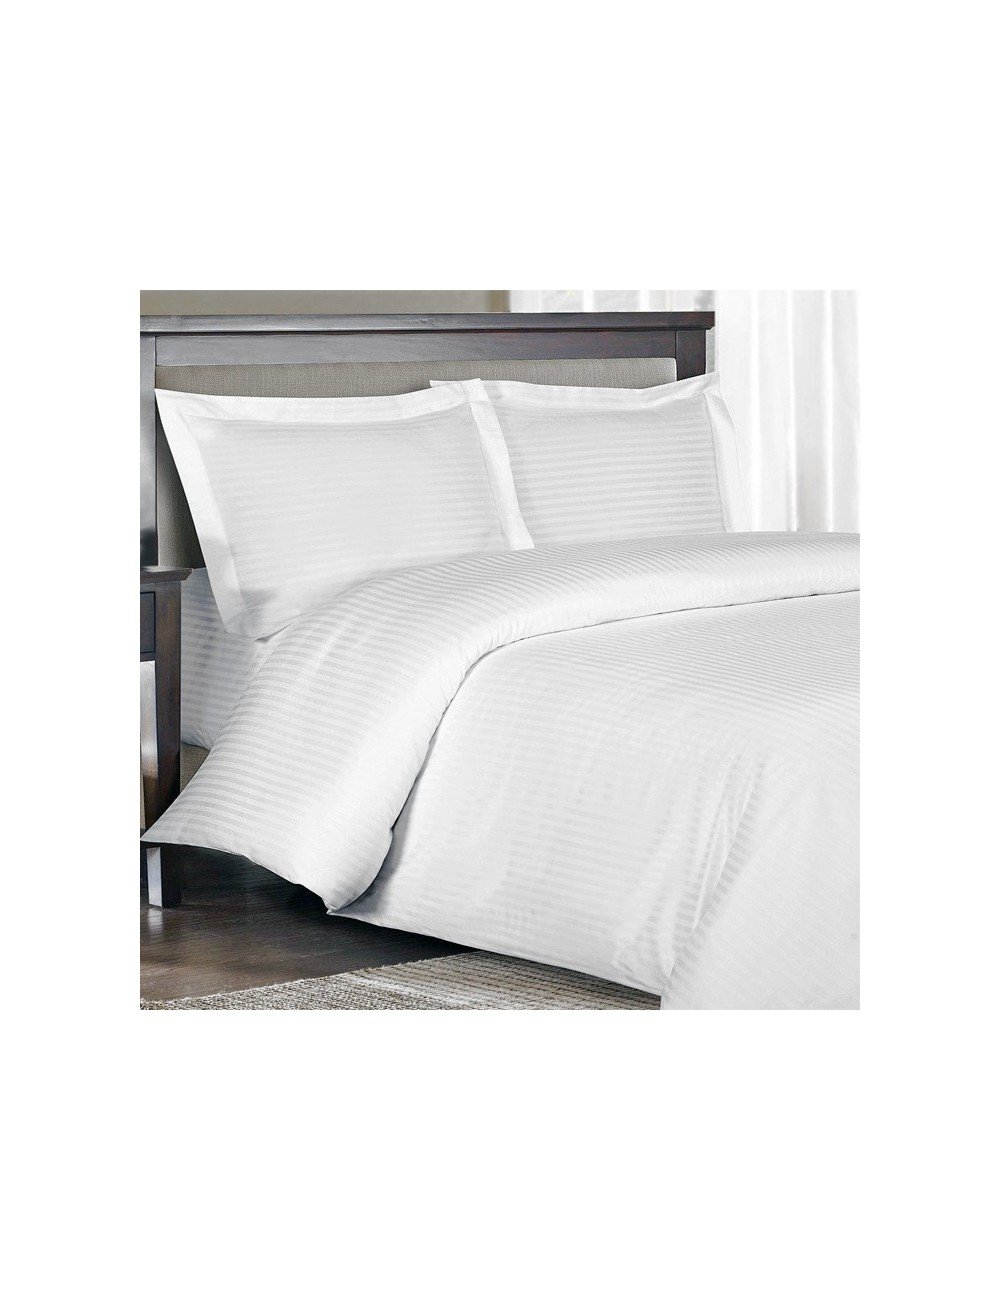 Fitted sheet 300 TC Sateen Stripe egyptian cotton - 1